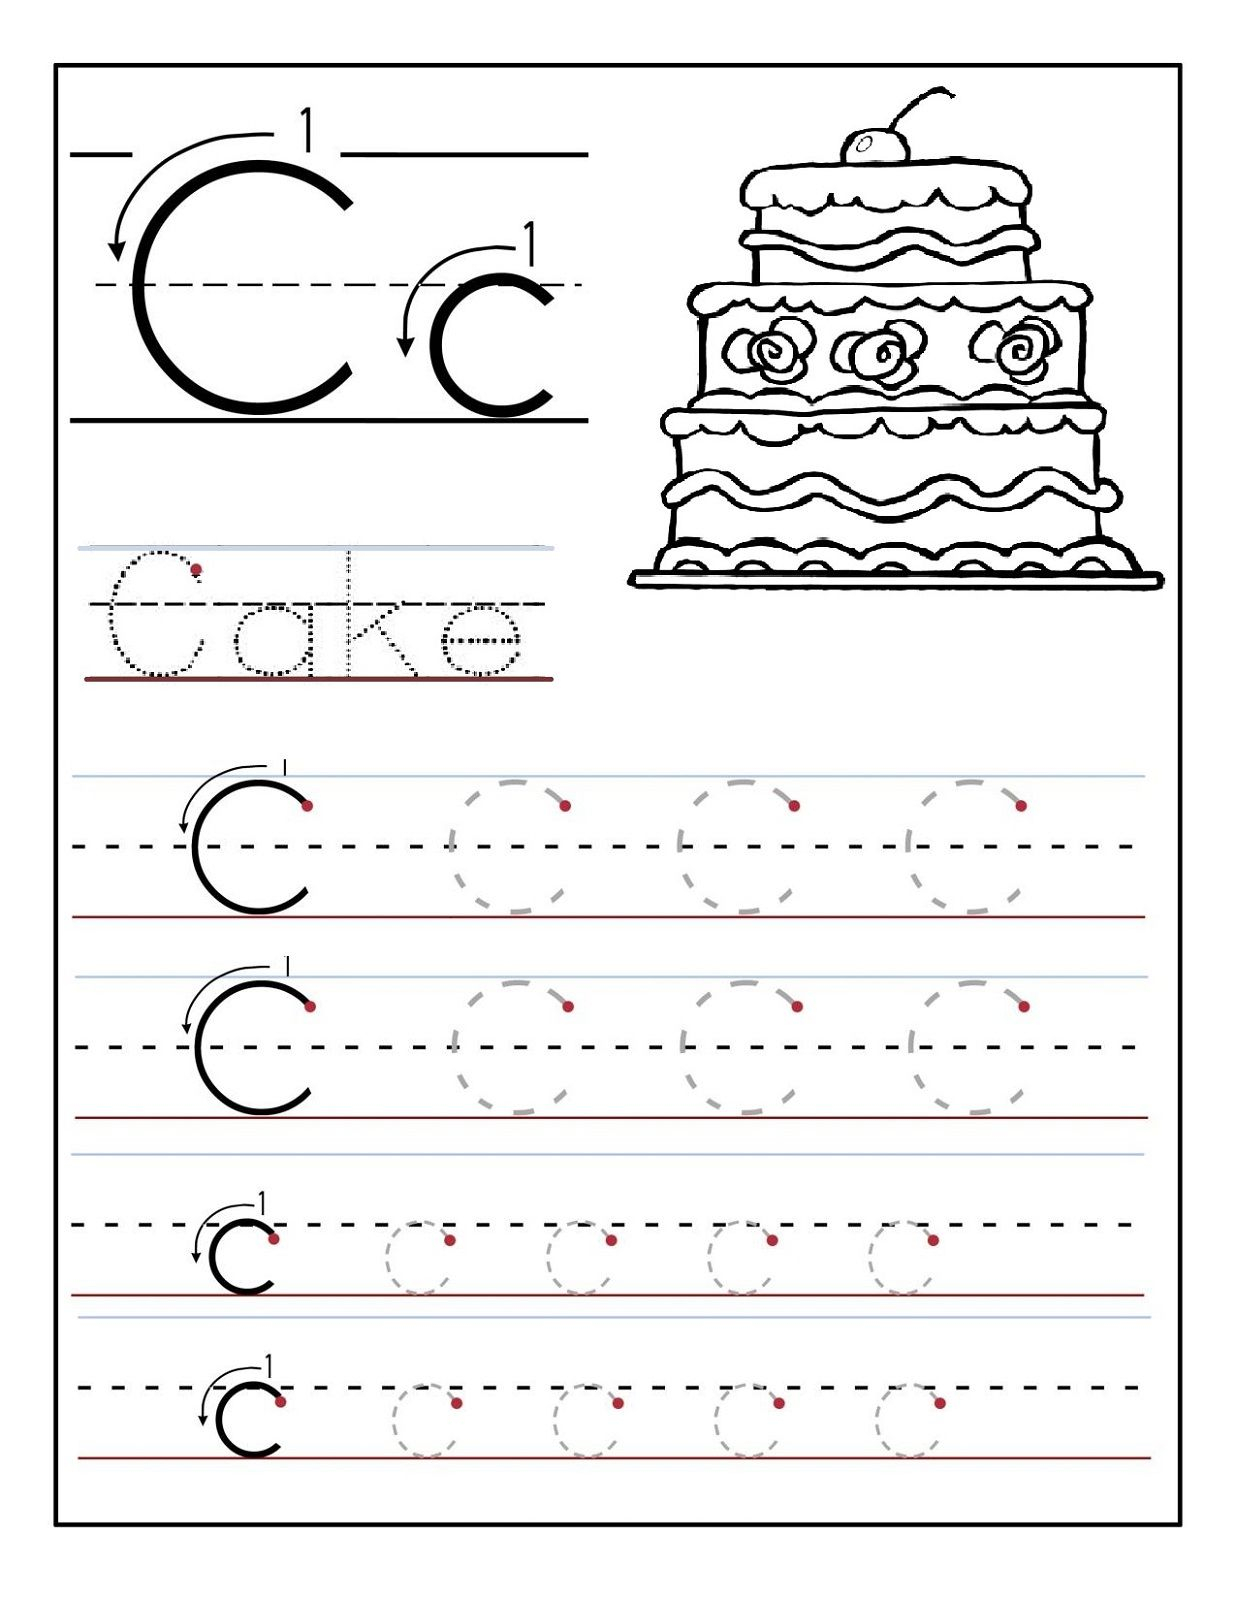 Trace The Letter C Worksheets | Letter Tracing Worksheets in C Letter Tracing